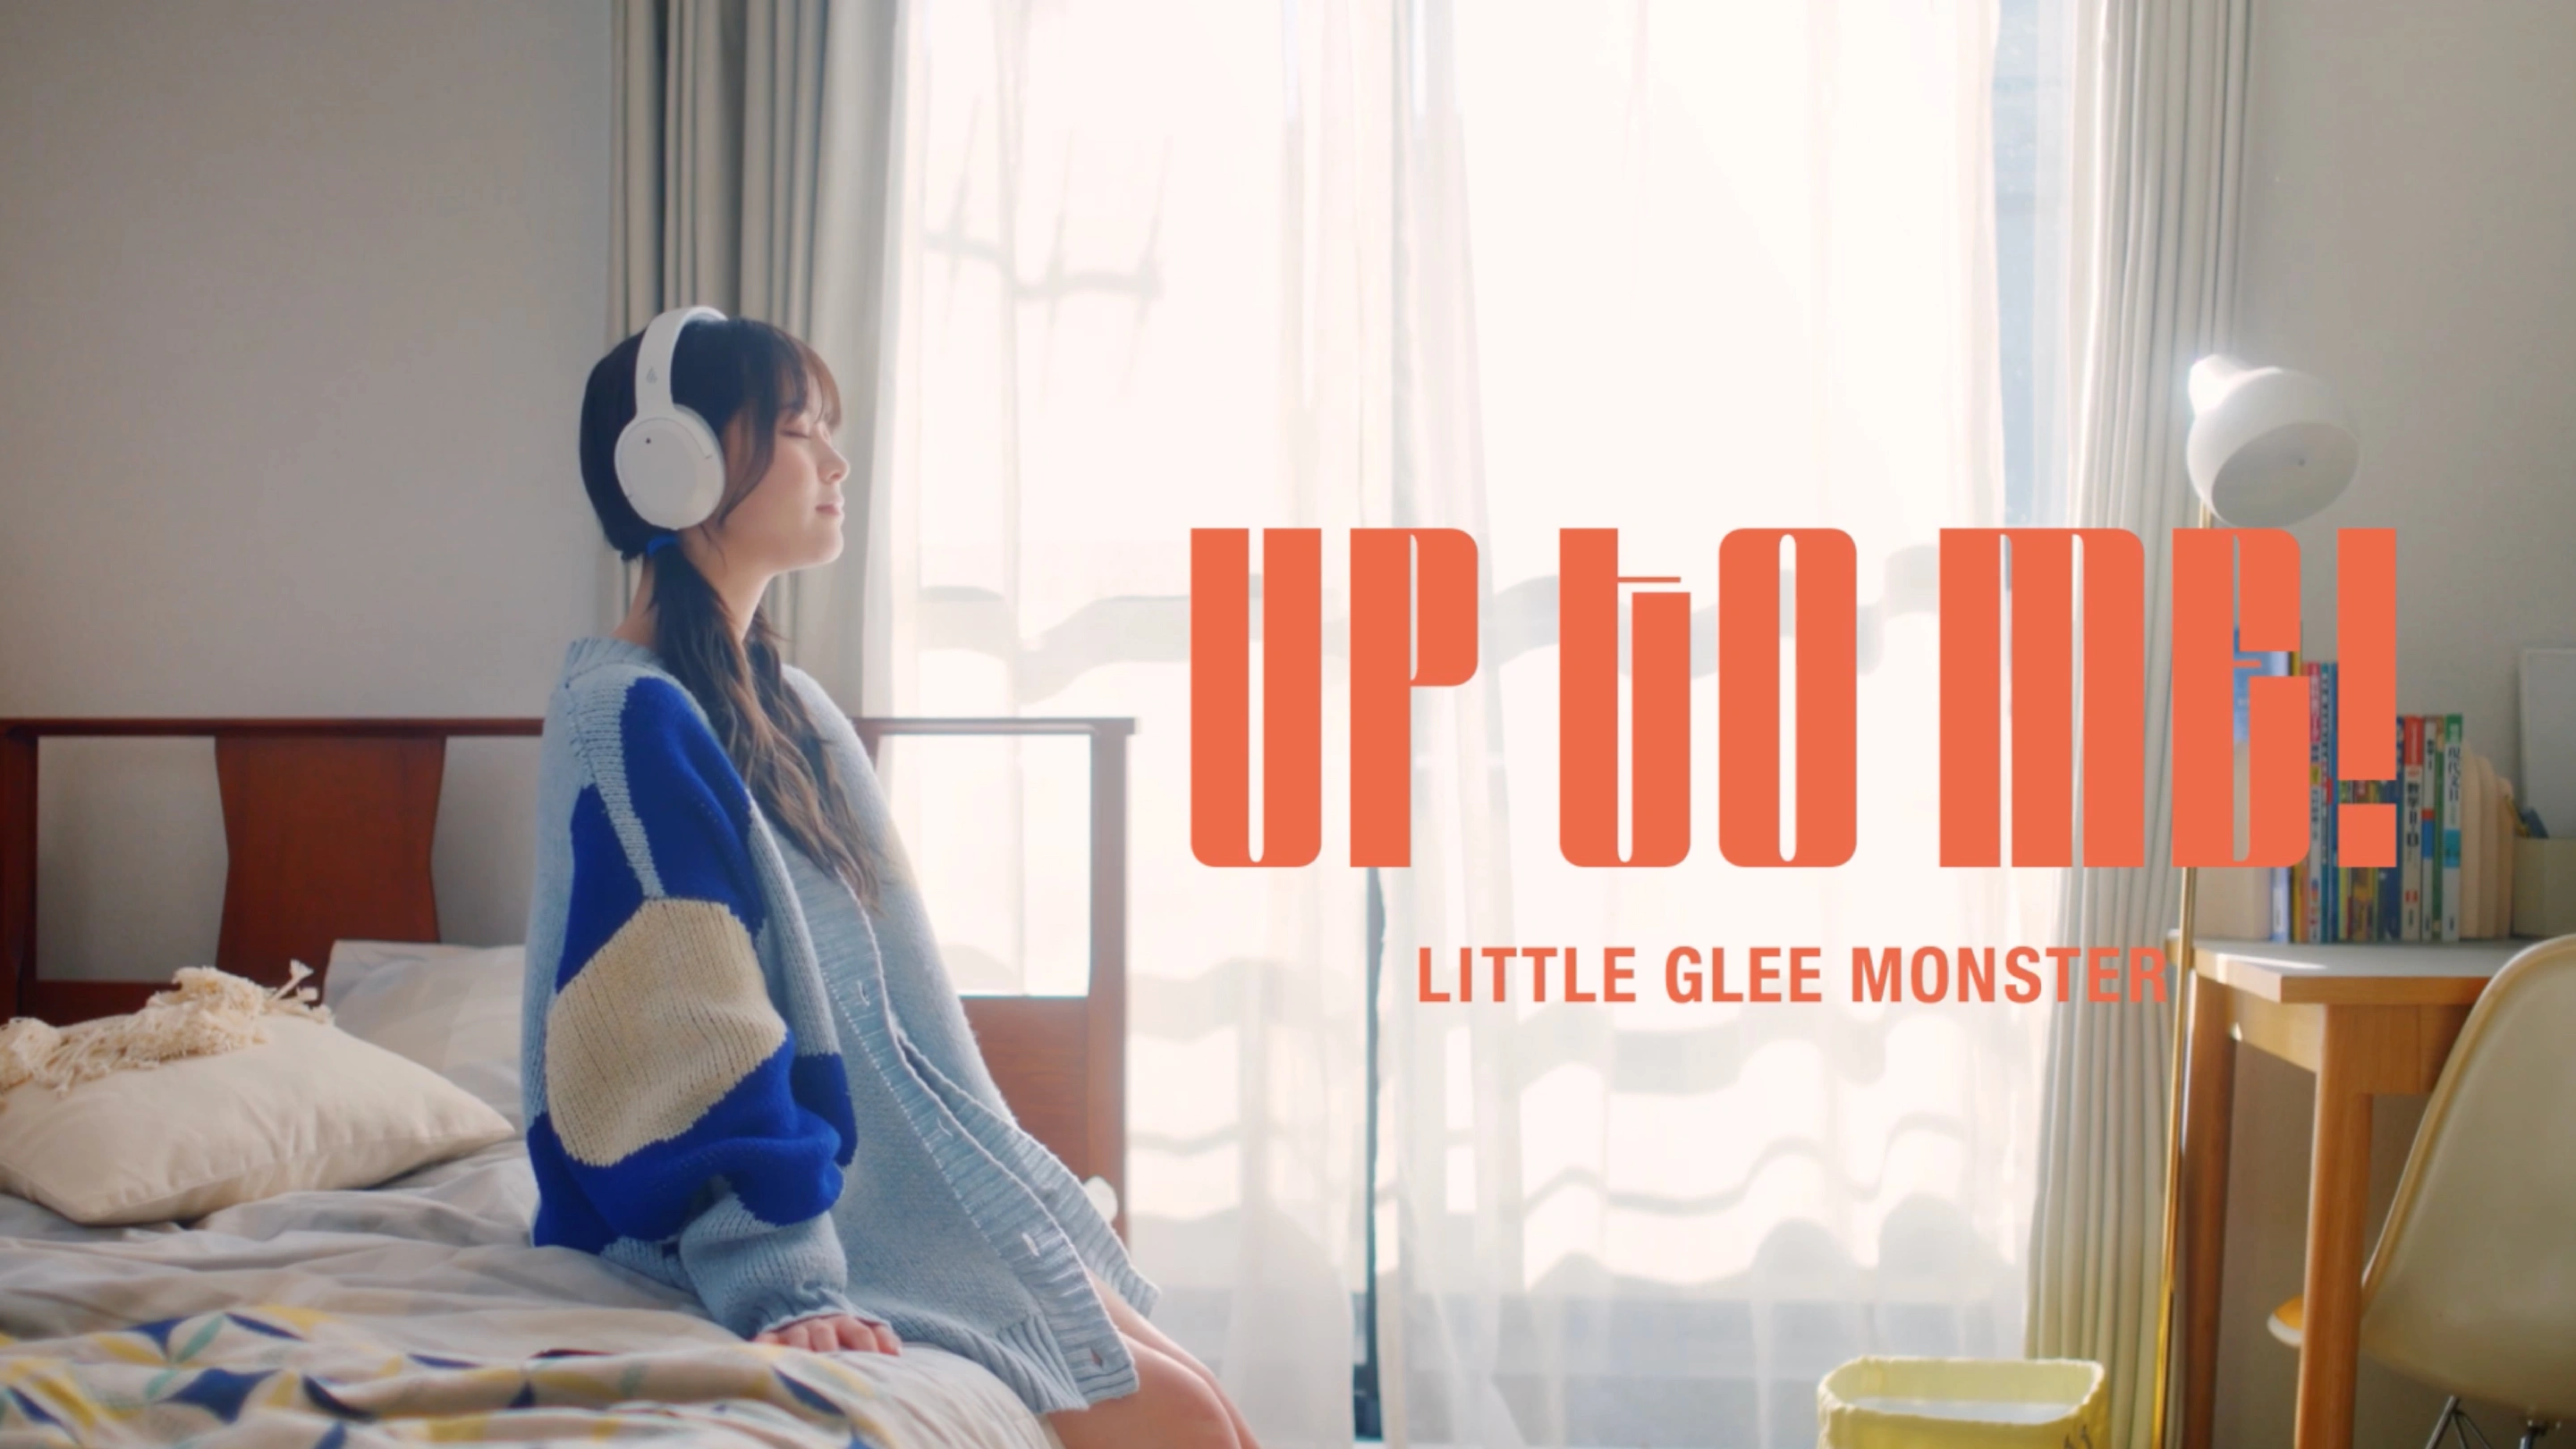 Little Glee Monster 「UP TO ME!」